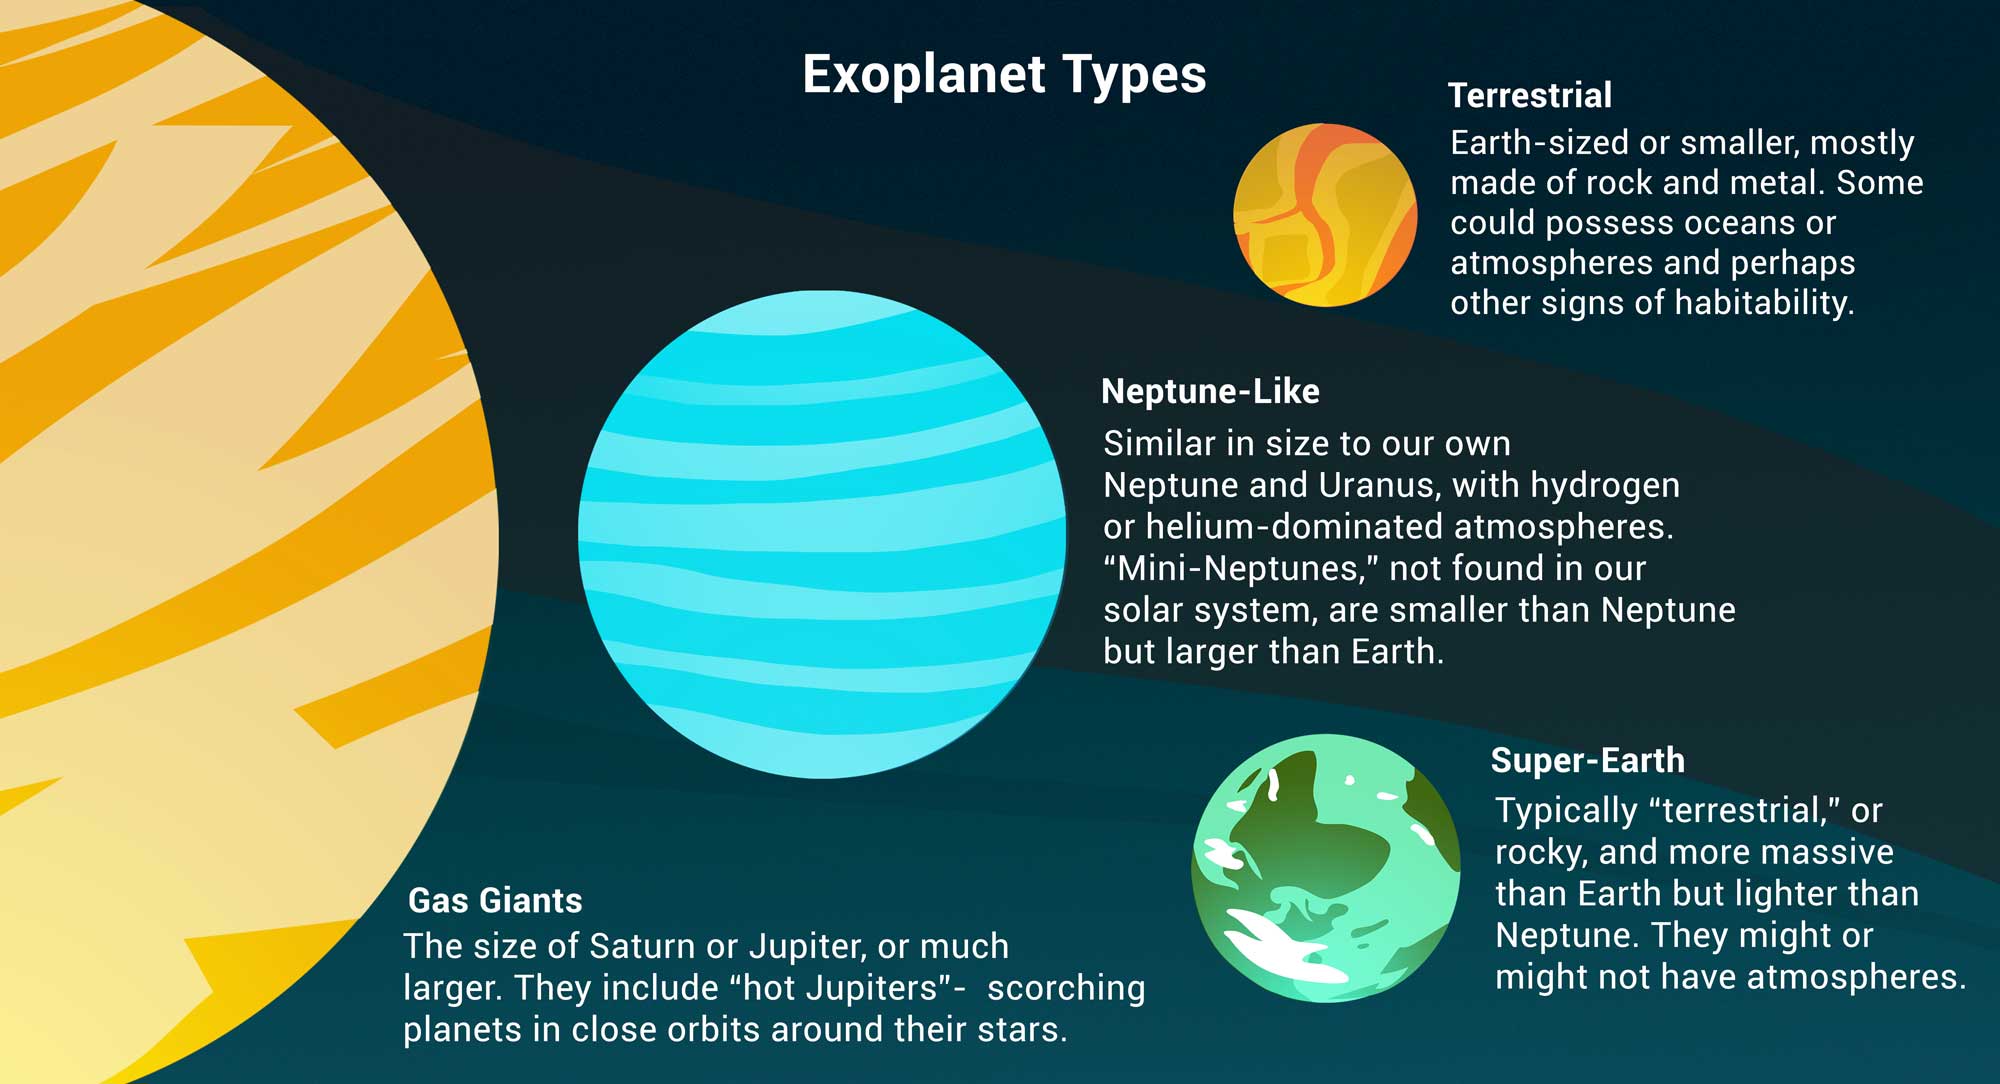 This infographic details the main types of exoplanets